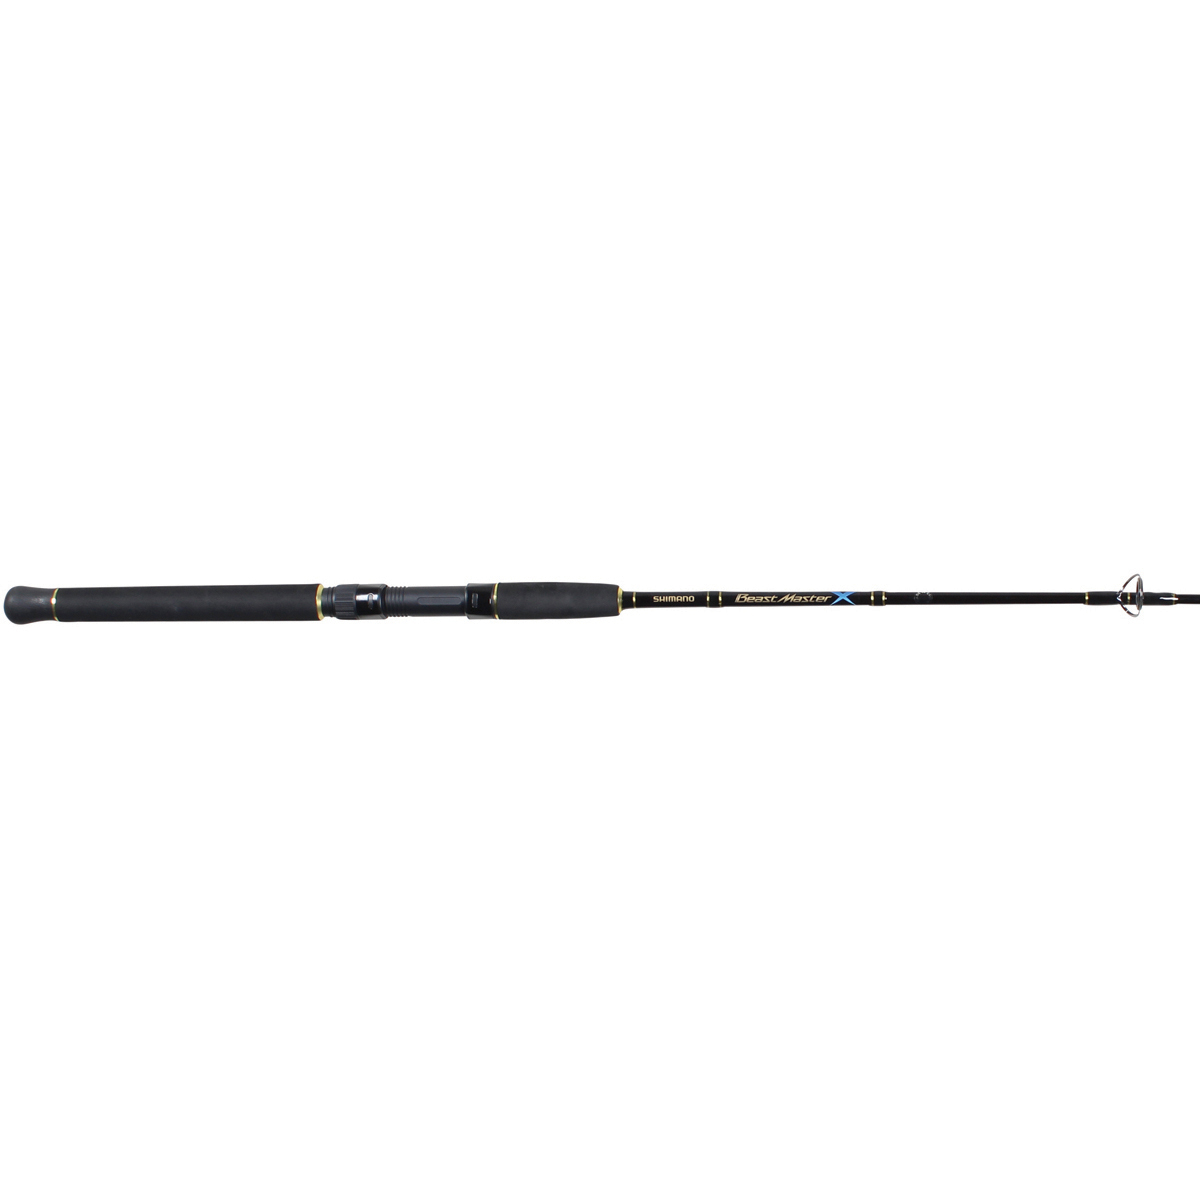 Shimano Beastmaster Spinning Rod 7ft 4-8kg (3 Piece) @ Club BCF